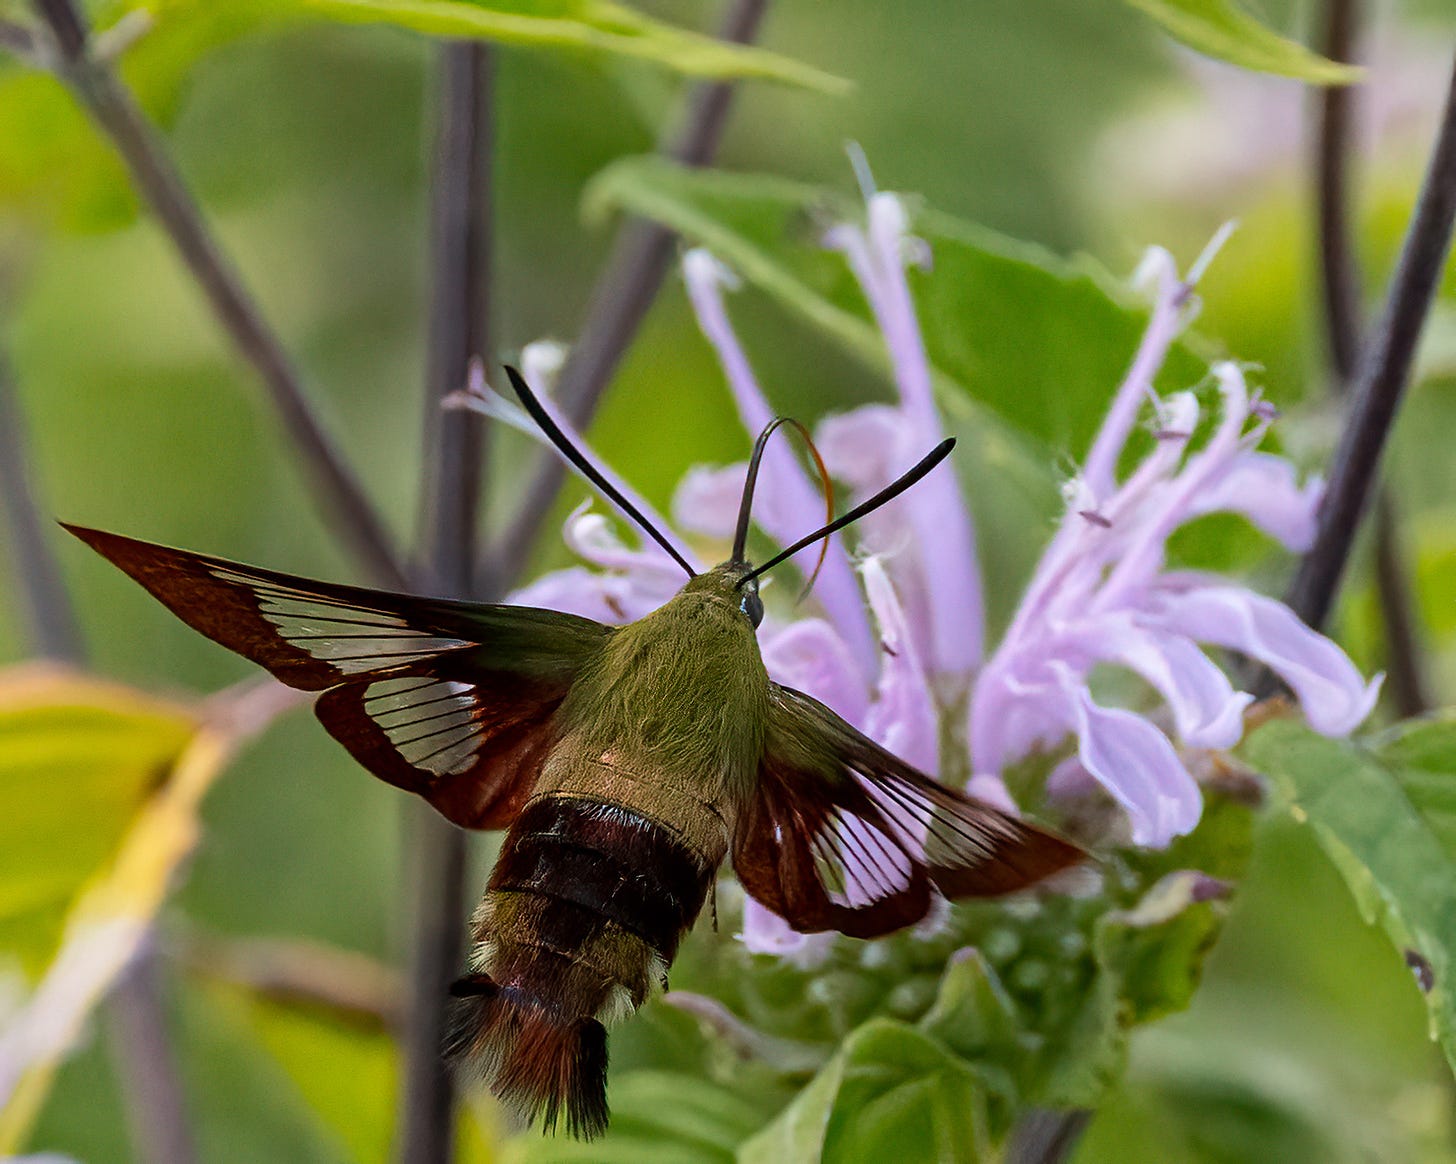 A hummingbird moth hovers next to a flower in order to get nectar. The moth has green feathery hairs on the top half of its body, see-through wings with maroon edges, long antennae, and a curving tongue.